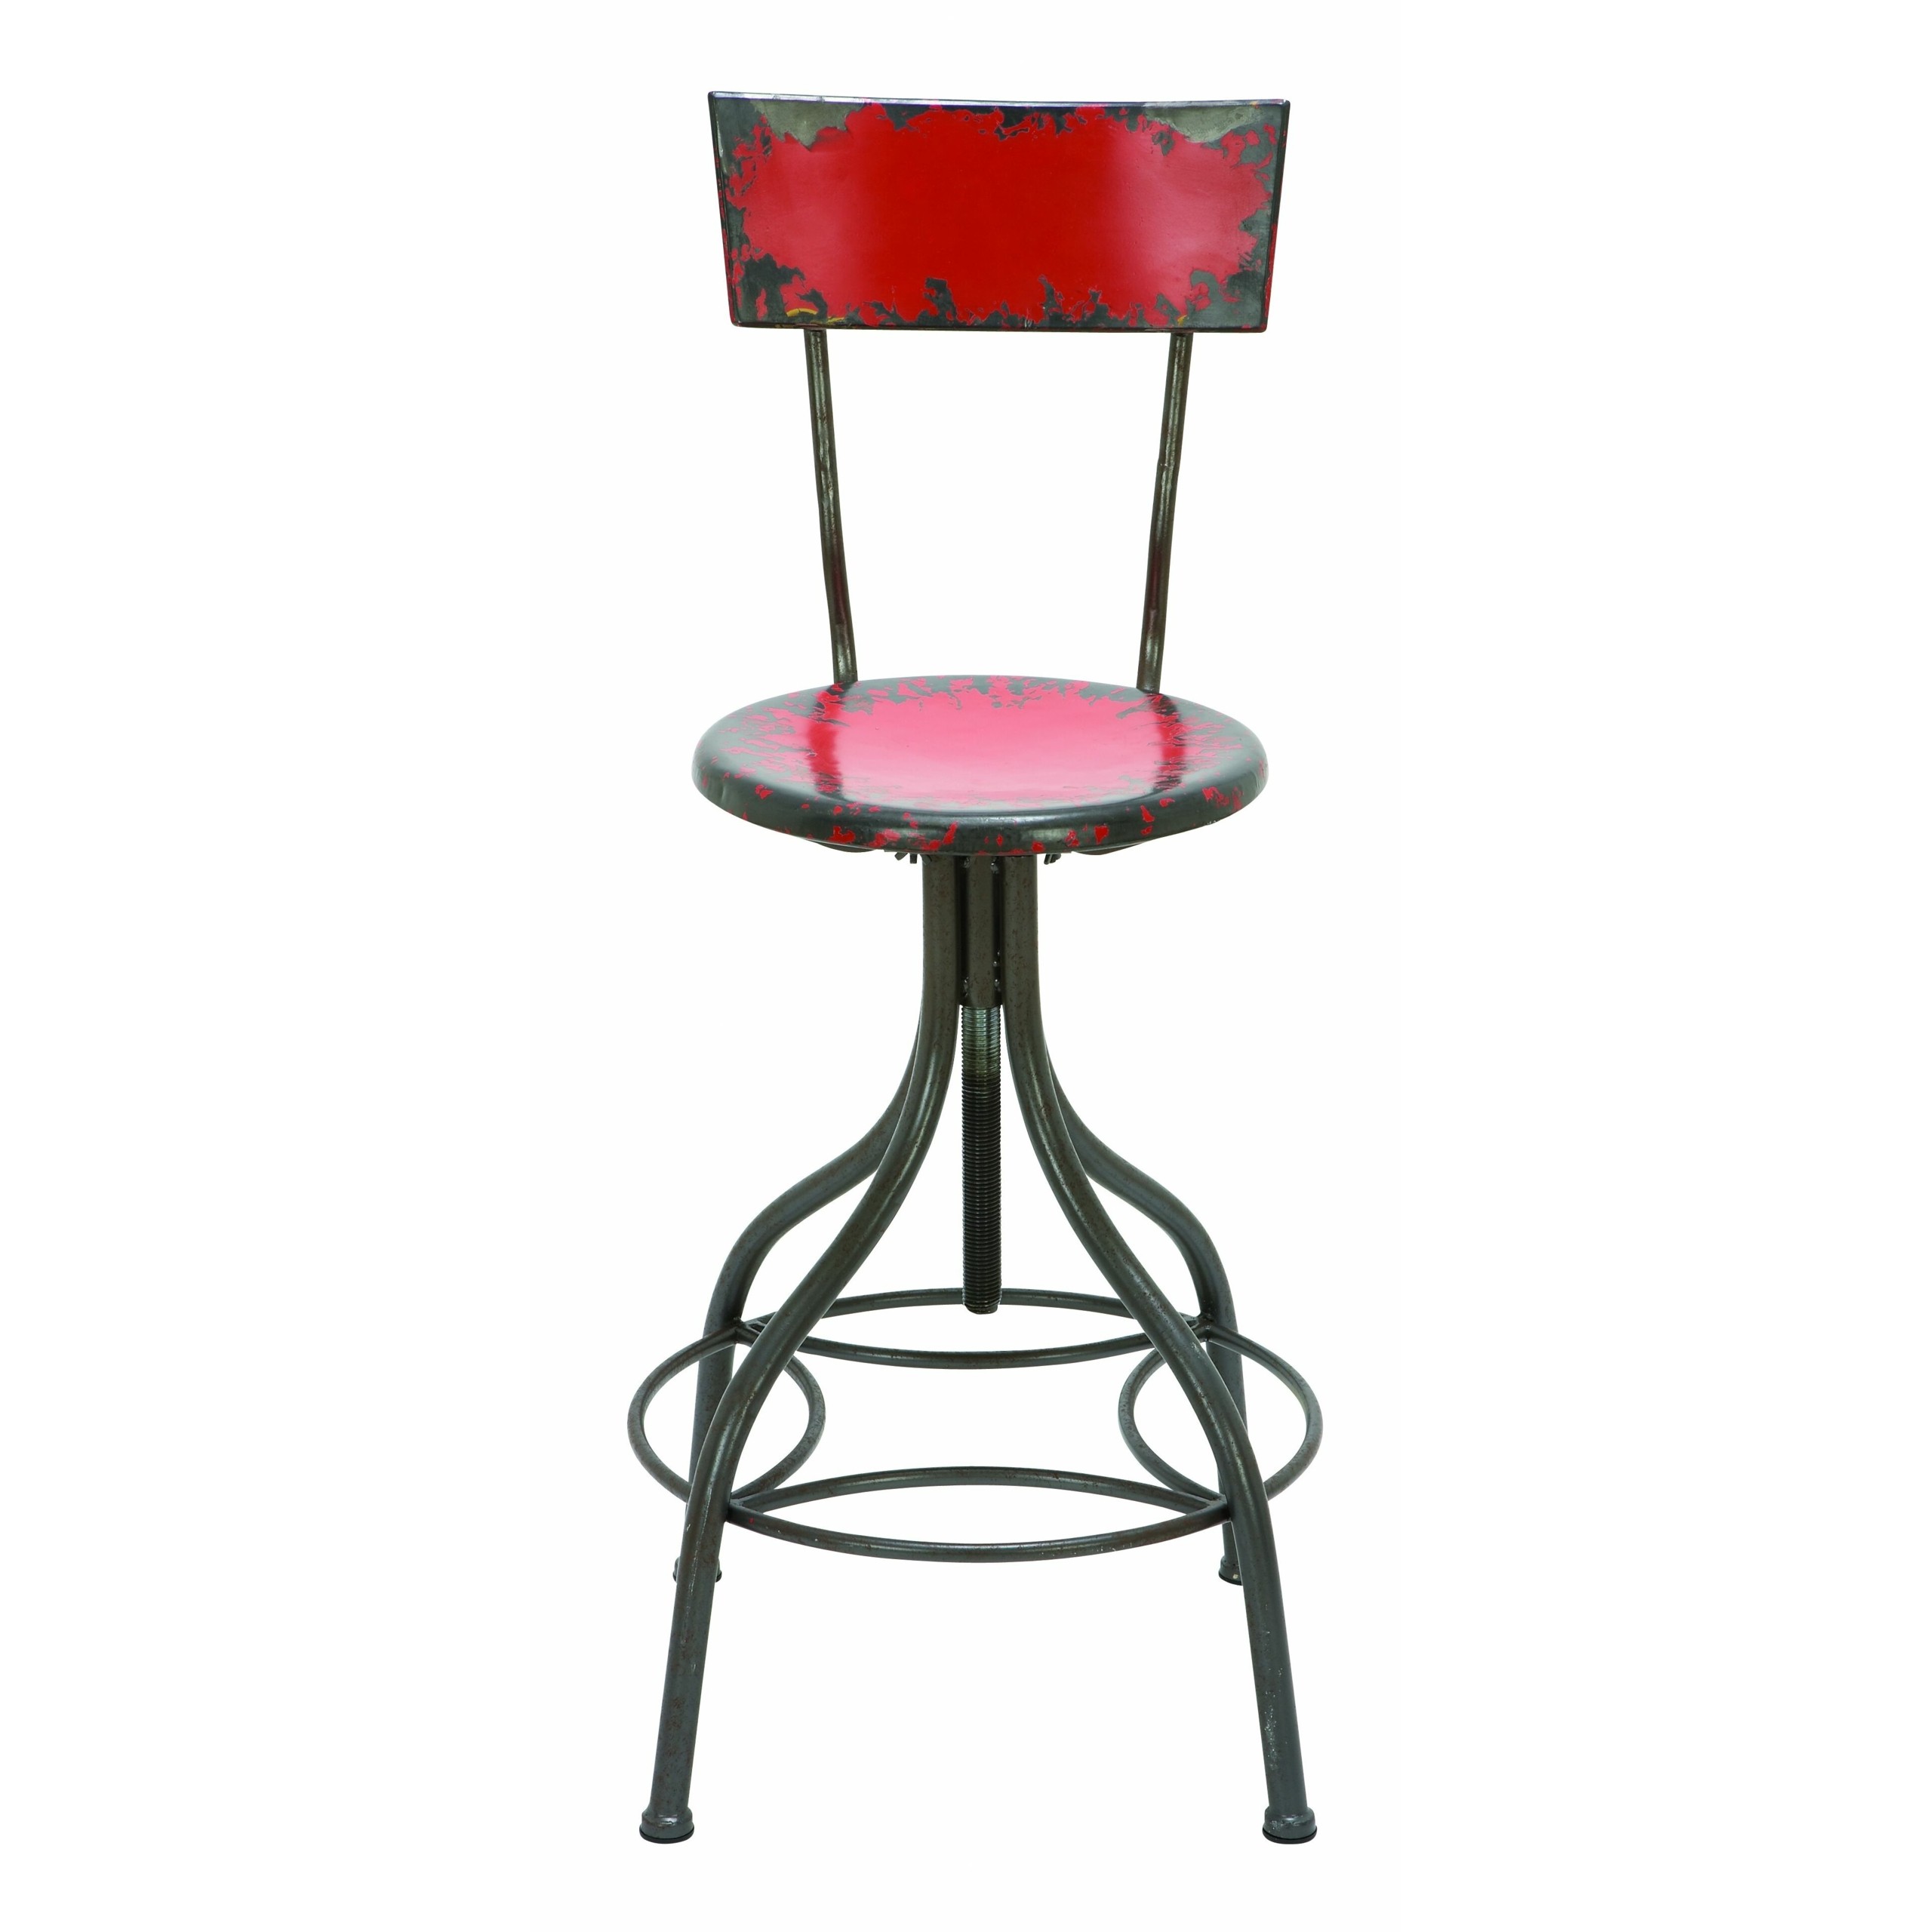 Deco 79 Metal Bar Chair, 41 by 18-Inch, Red